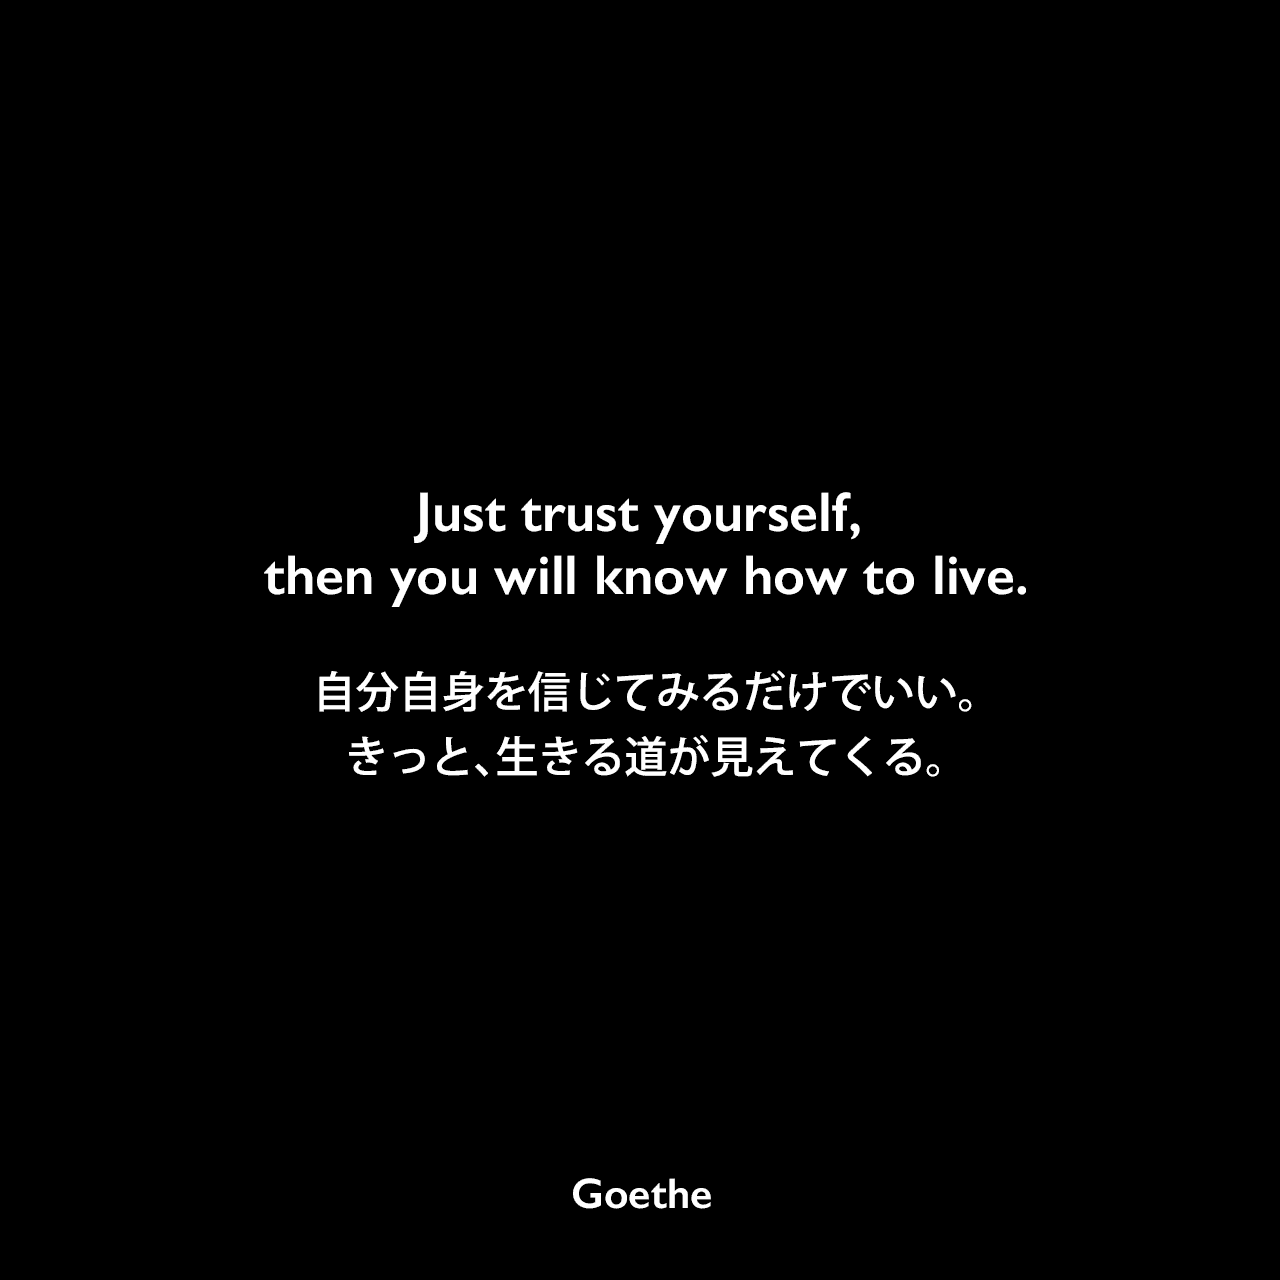 Just trust yourself, then you will know how to live.自分自身を信じてみるだけでいい。きっと、生きる道が見えてくる。